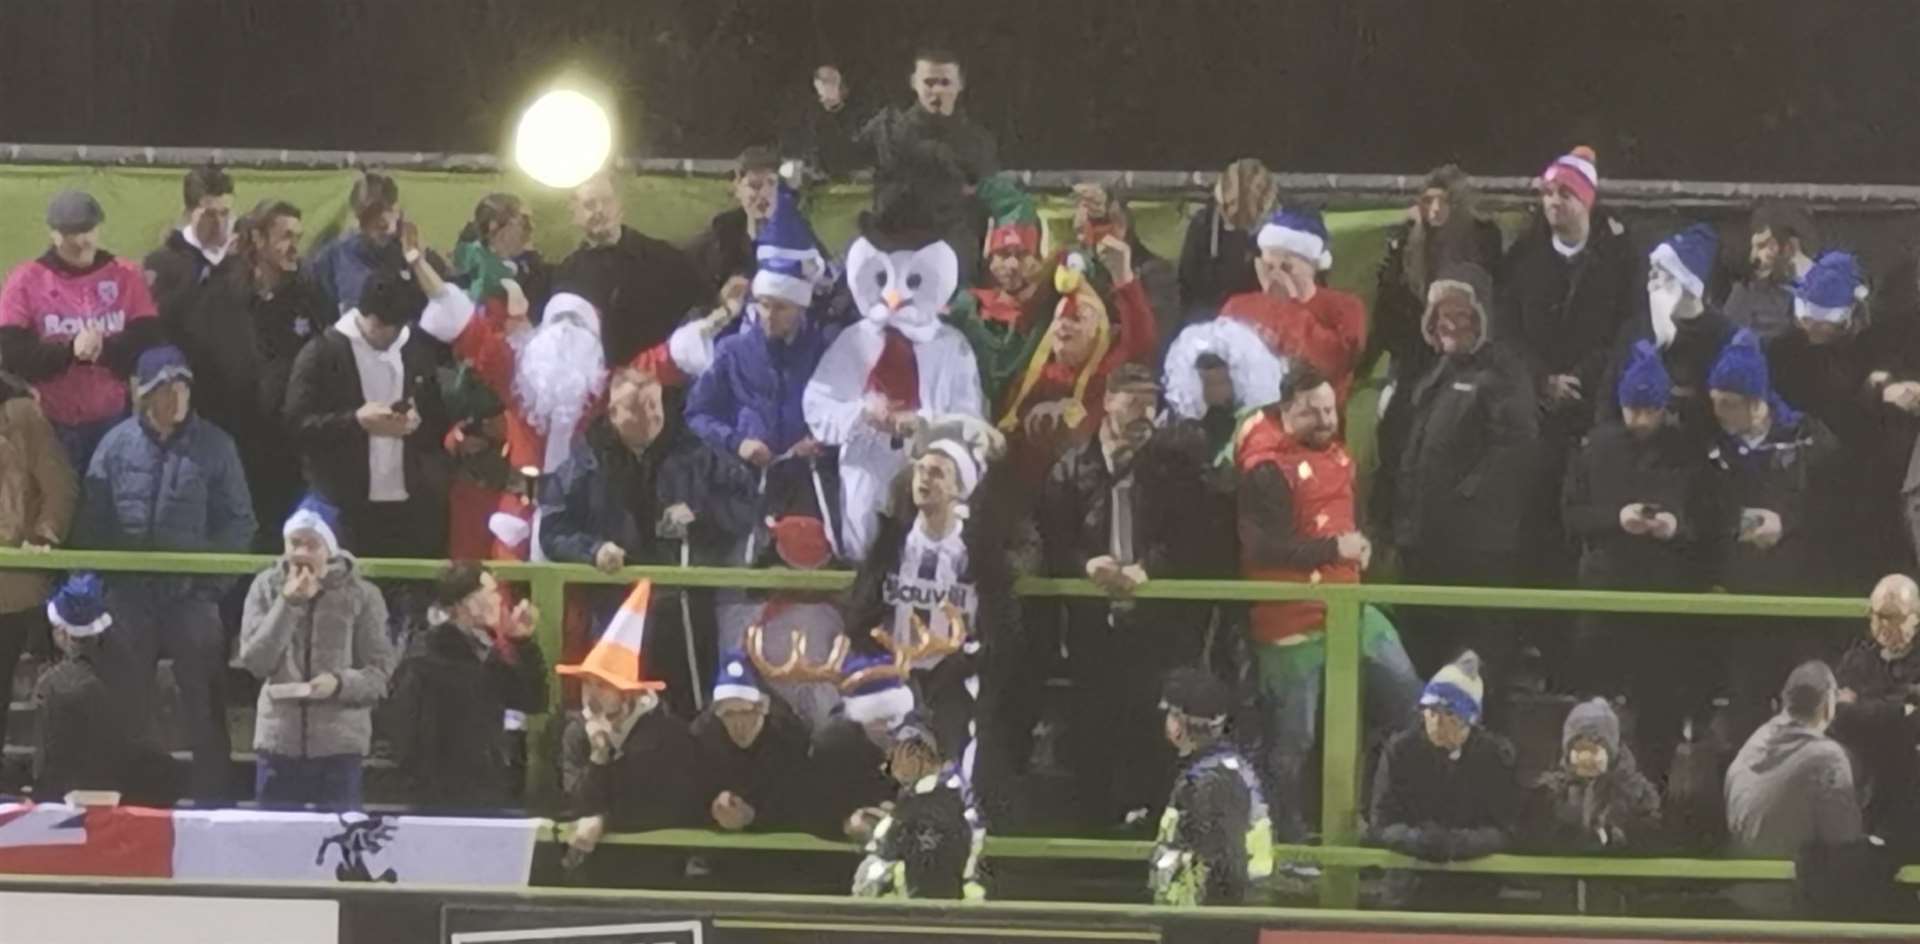 Gillingham fans were in festive spirit at Forest Green on Friday night.